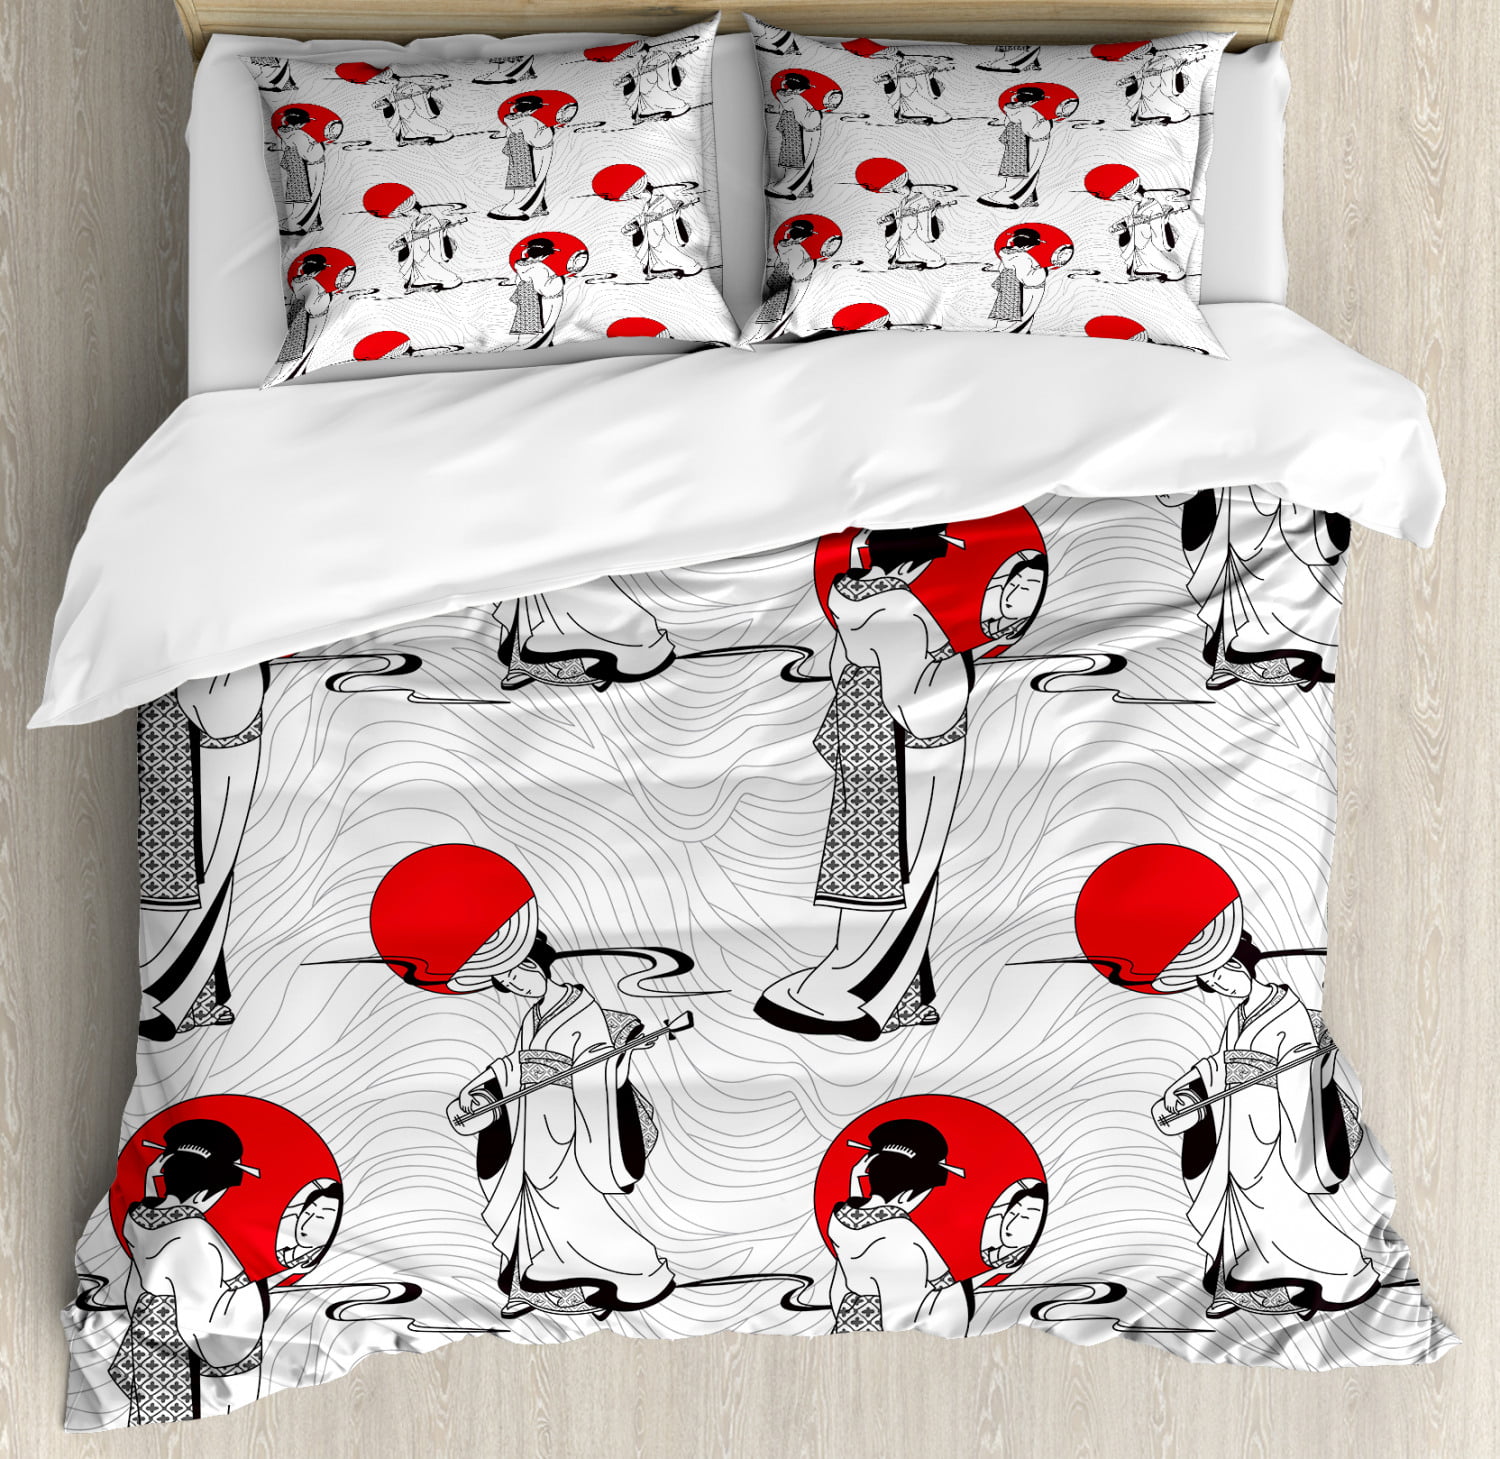 Asian Duvet Cover Set King Size, Red And Black Duvet Covers King Size